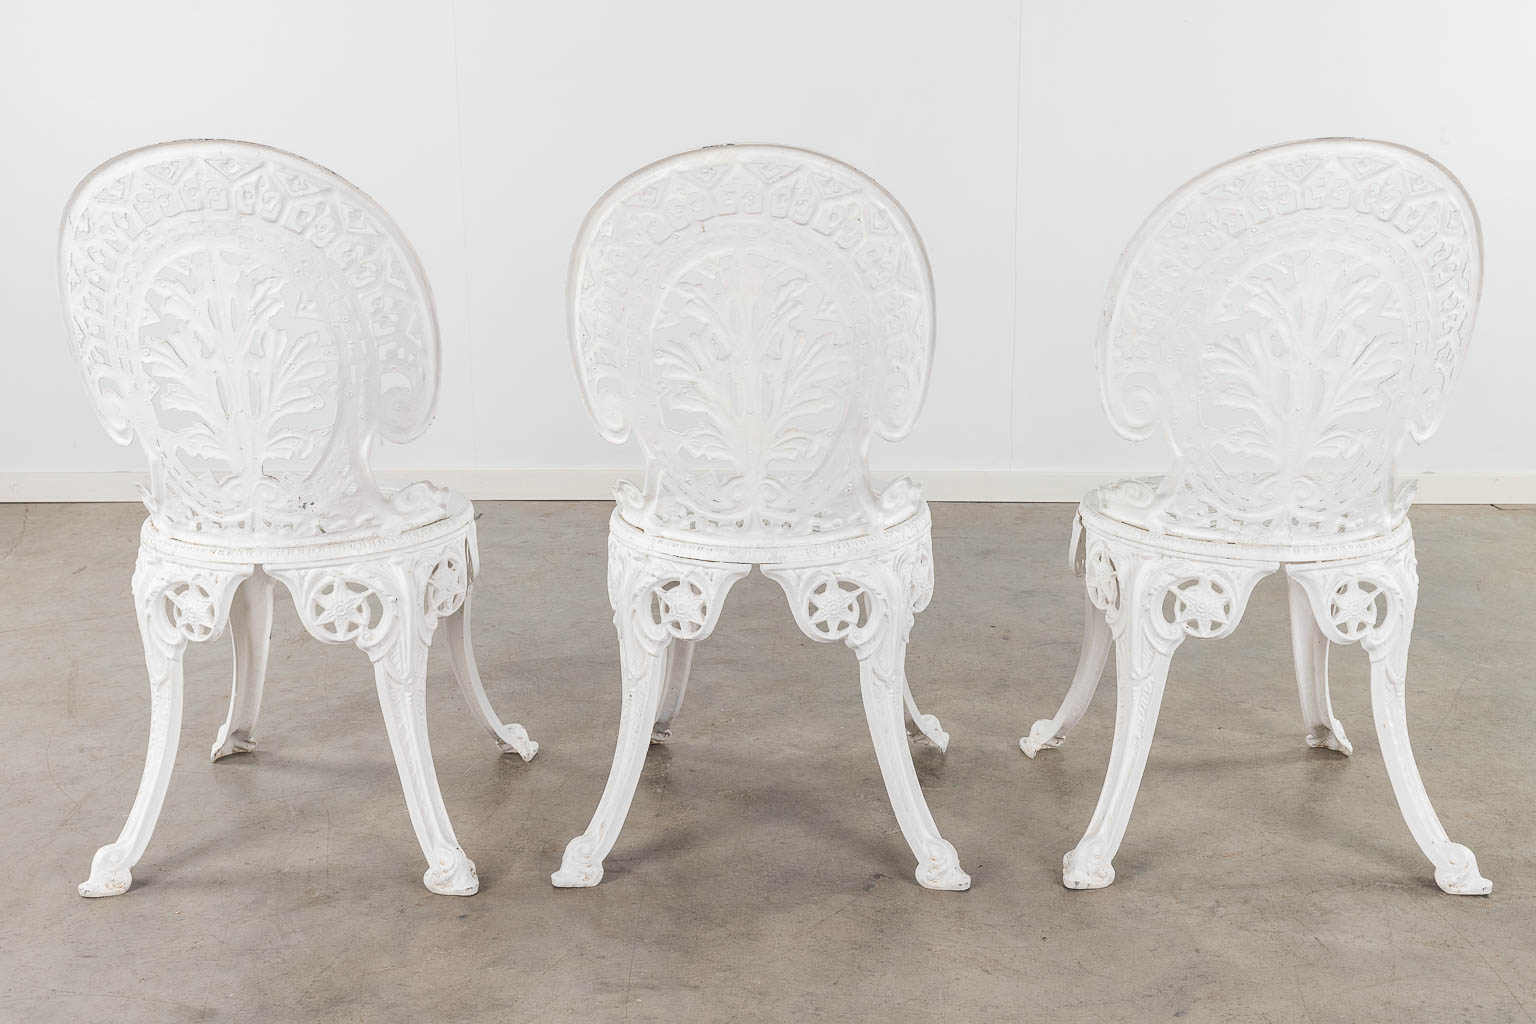 A garden set, consisting of a table and 3 chairs, white patinated aluminium. (H: 65 x D: 70 cm)